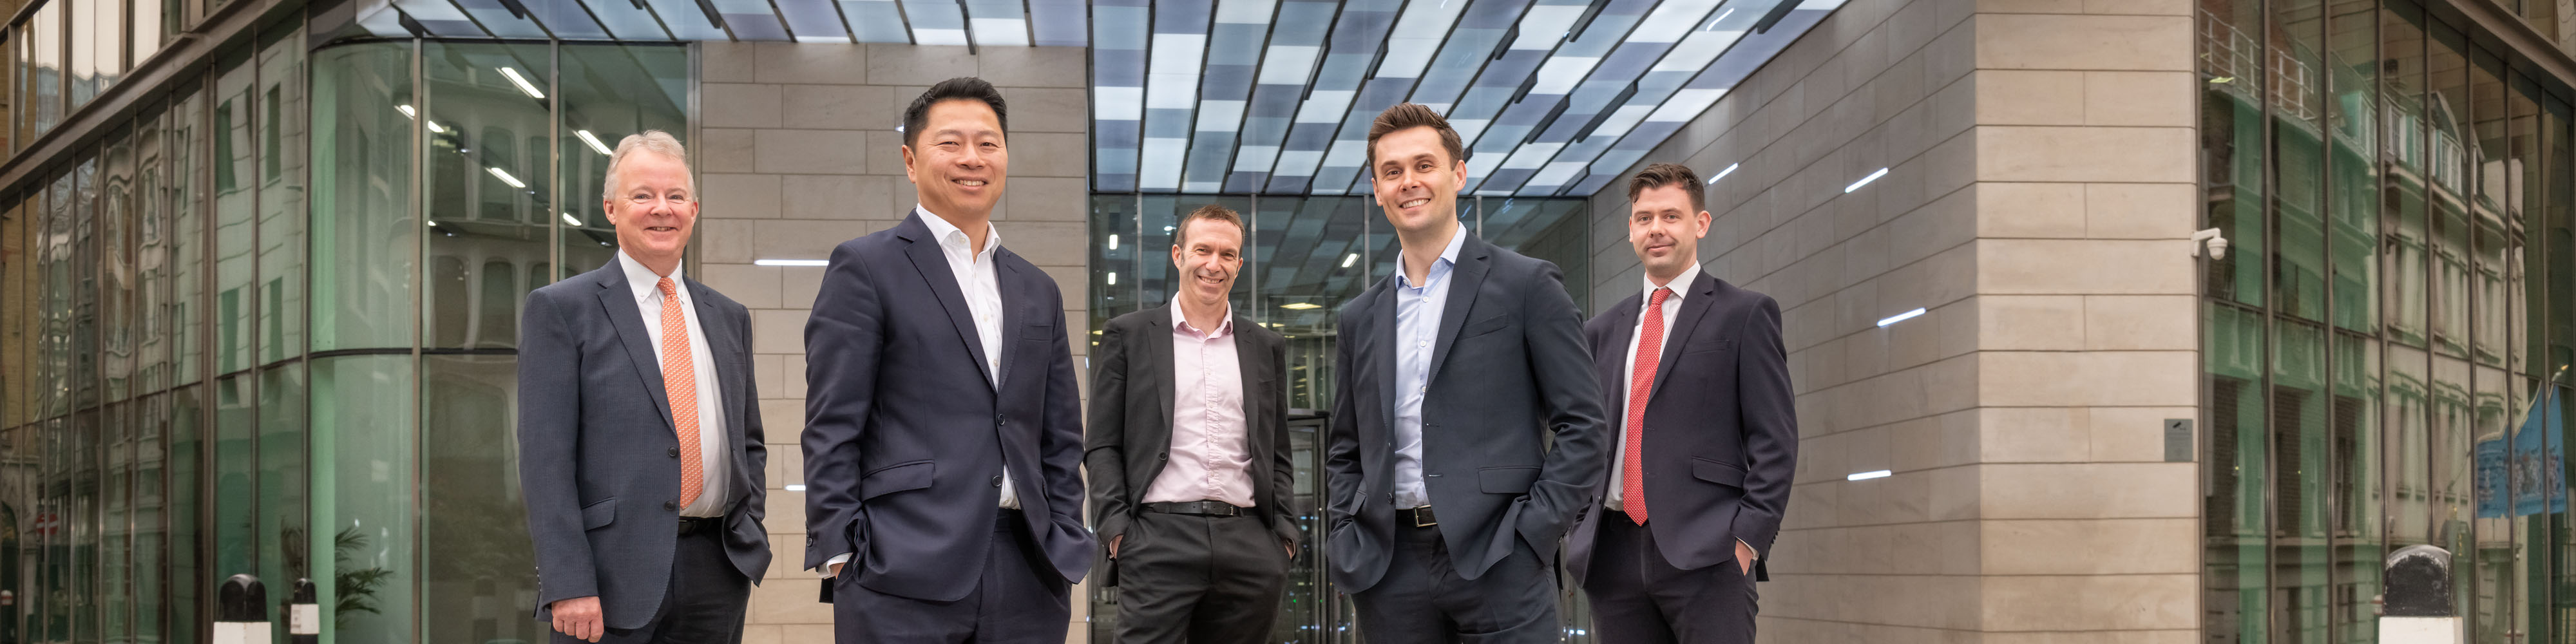 Group portrait photograph of the senior management team of a FTSE 350 company in the city of London